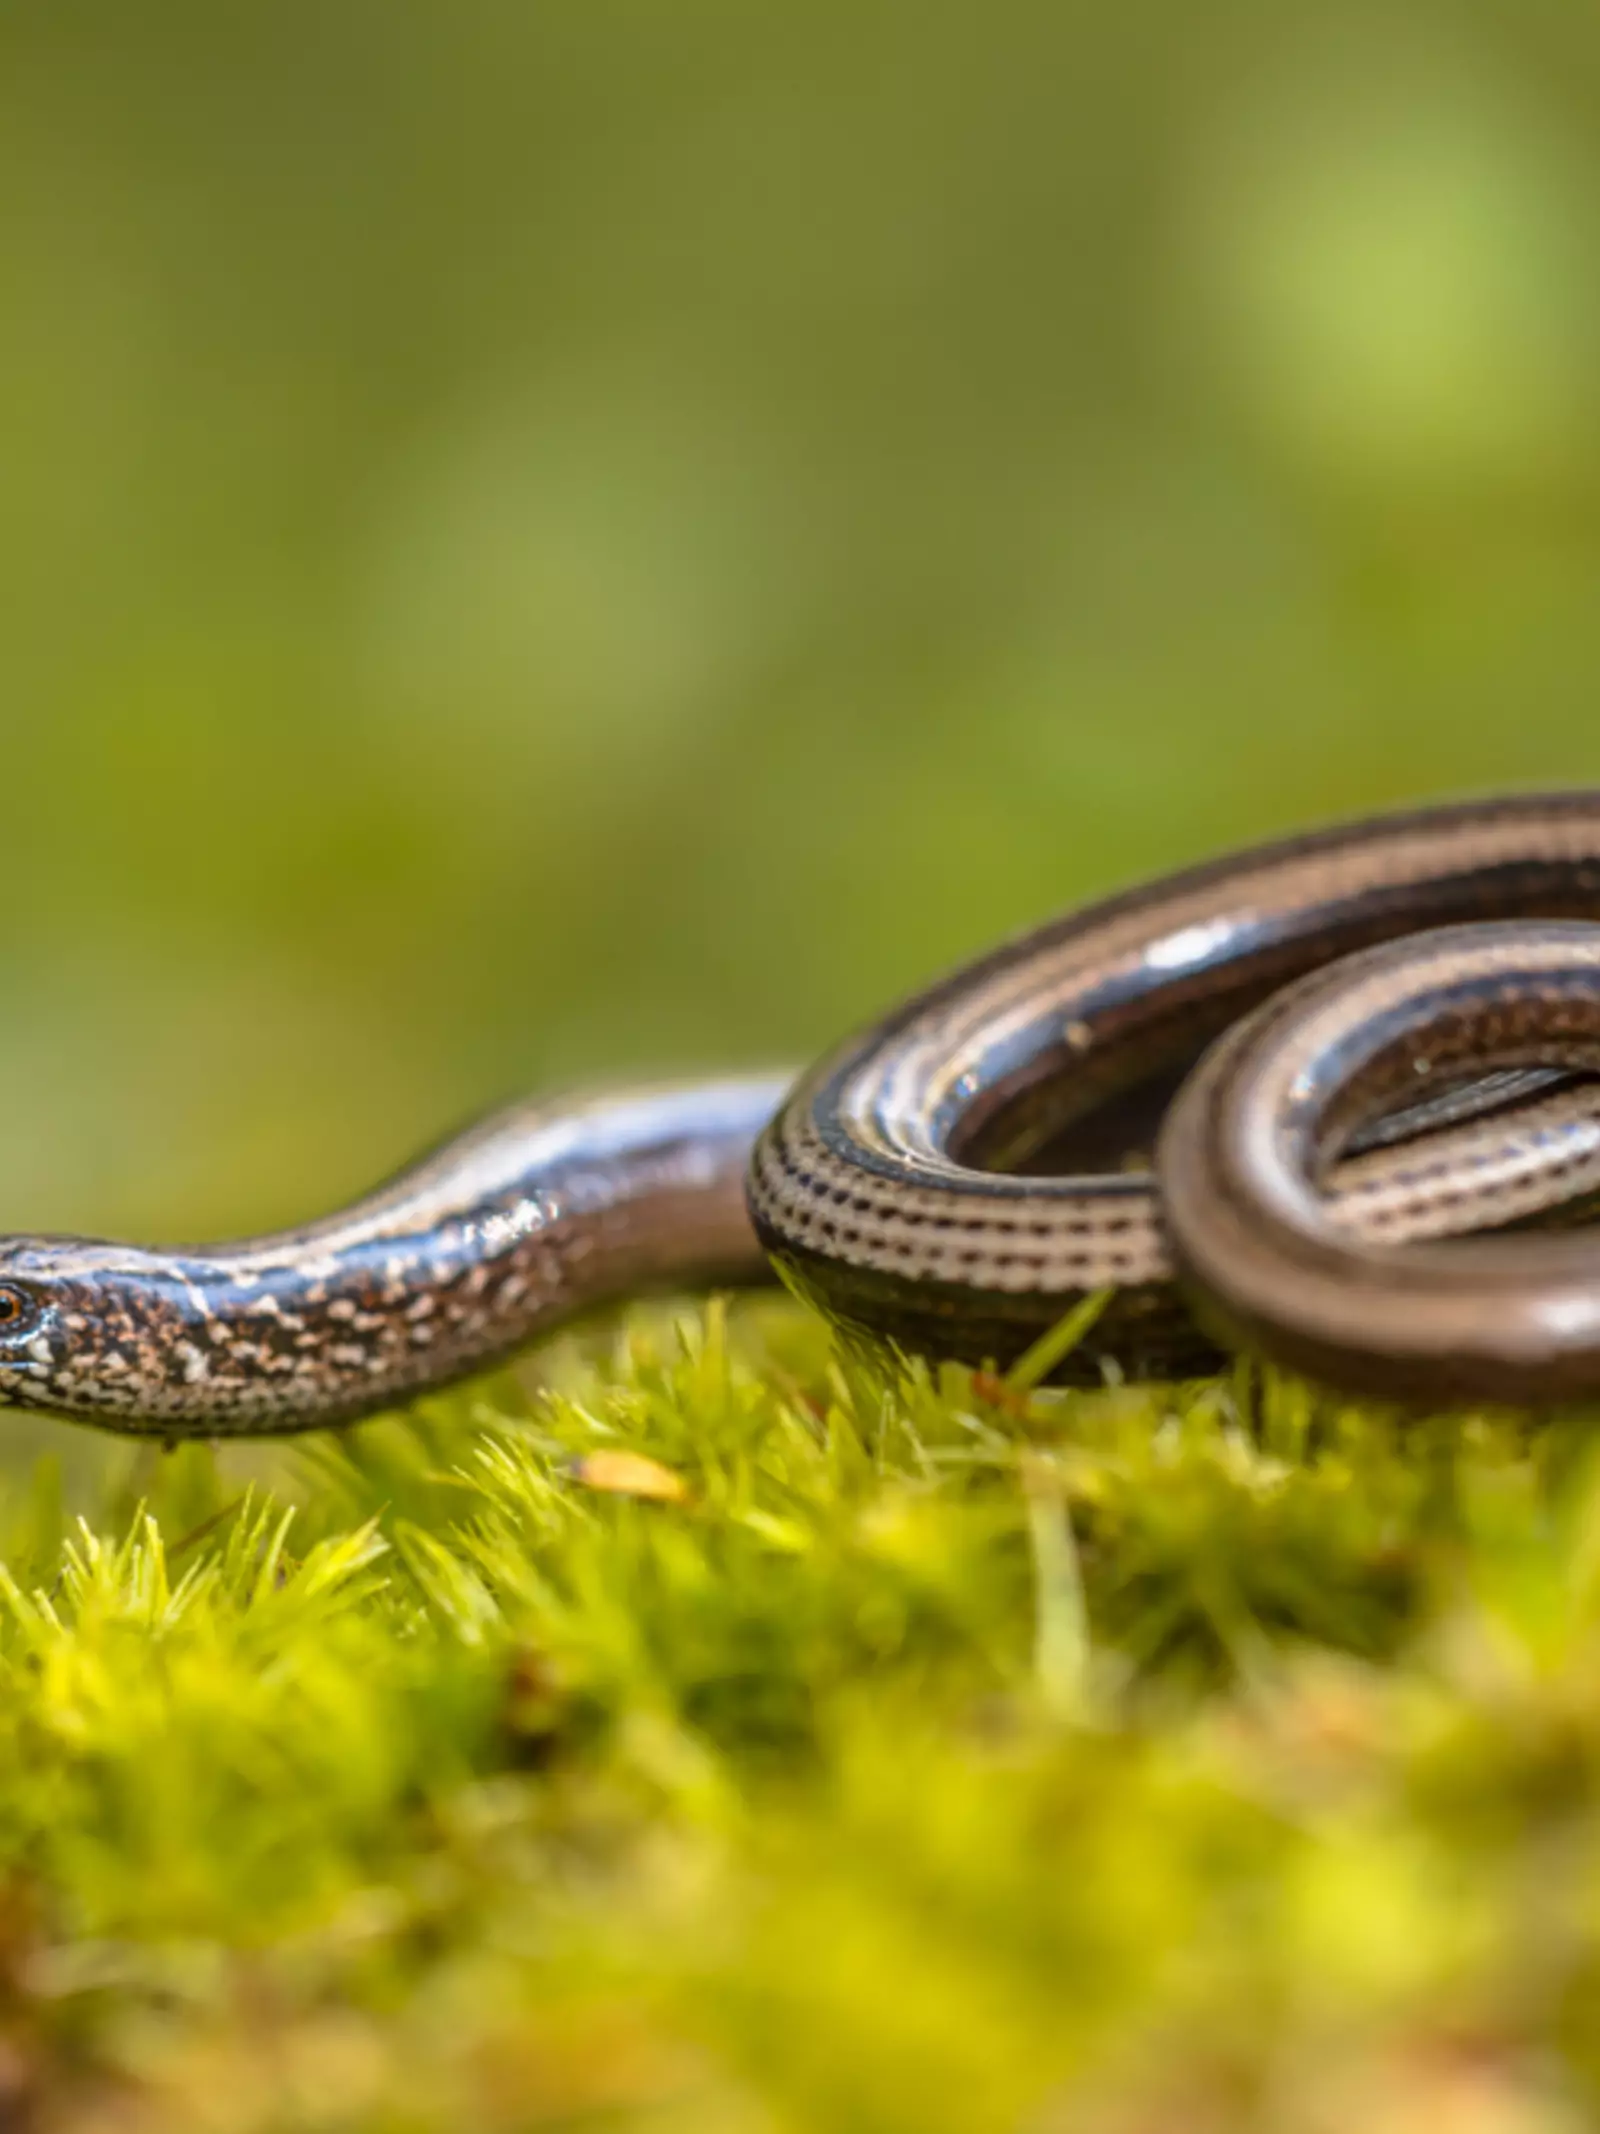 Slow worm on moss